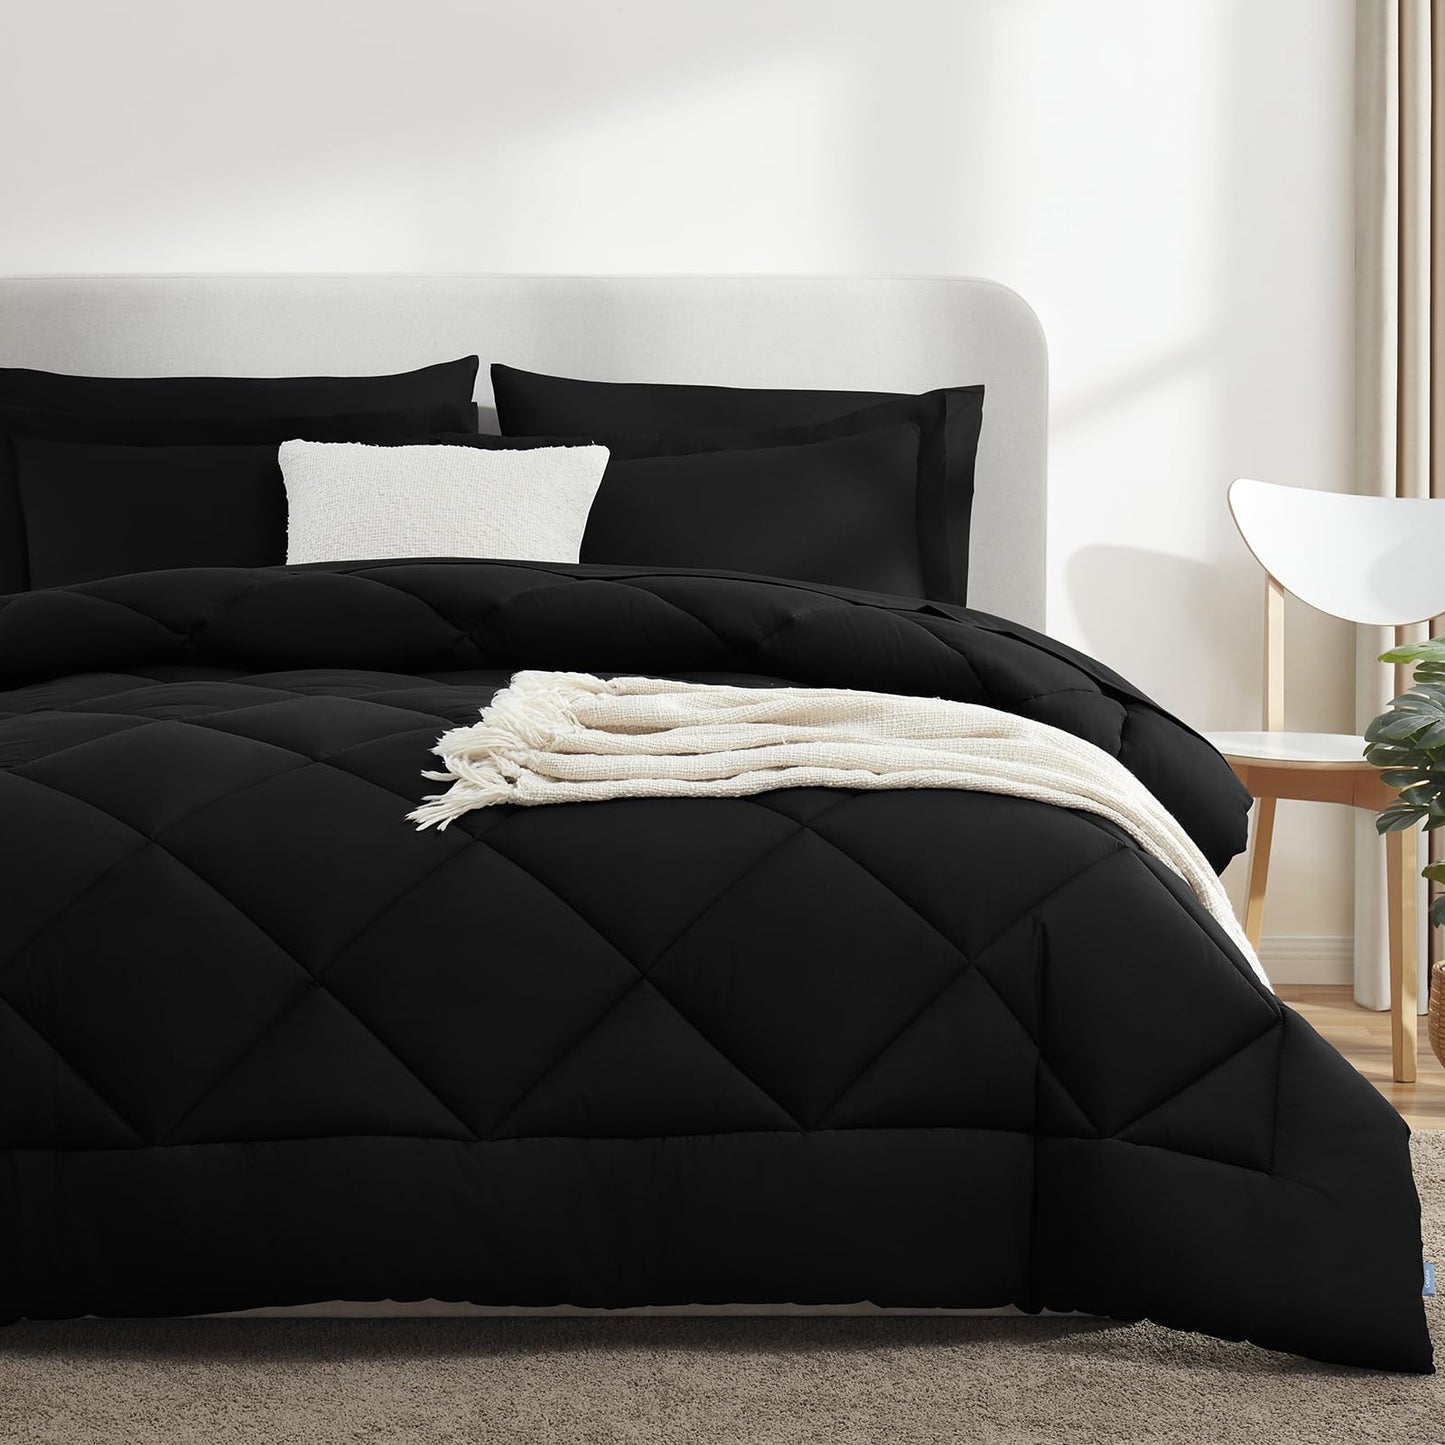 CozyLux Twin XL Size Comforter Set 5 Pieces Black Twin Extra Long Bed in a Bag for College Dorm All Season Bedding Sets with Comforter, Pillow Shams, Flat Sheet, Fitted Sheet and Pillowcases